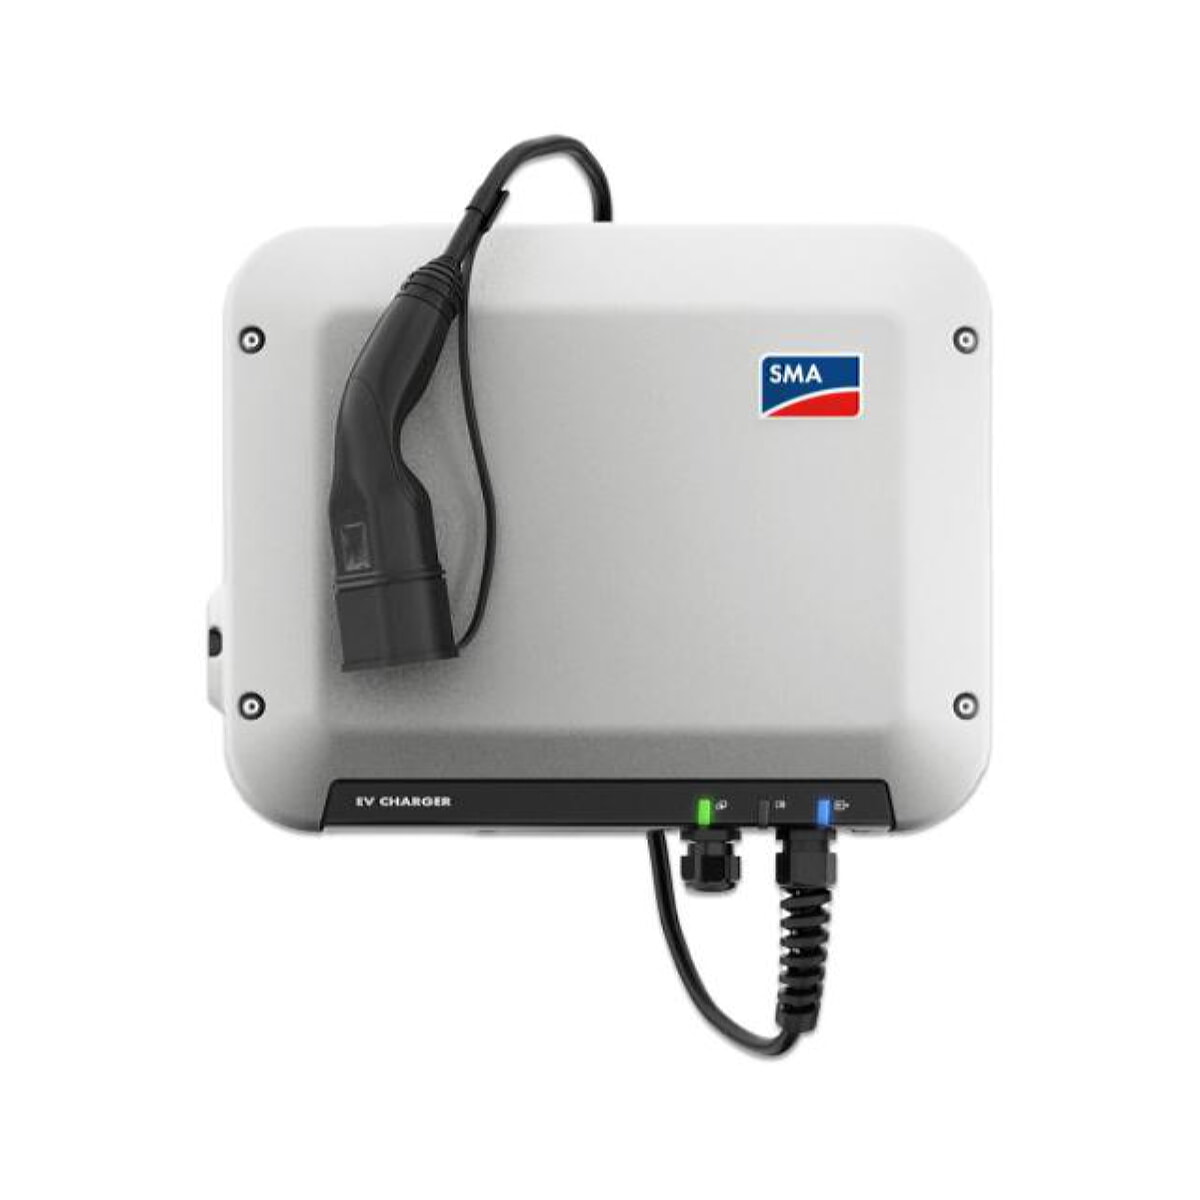 SMA EV CHARGER 7.4 Single-phase AC charging station with 7.5 m charging cable